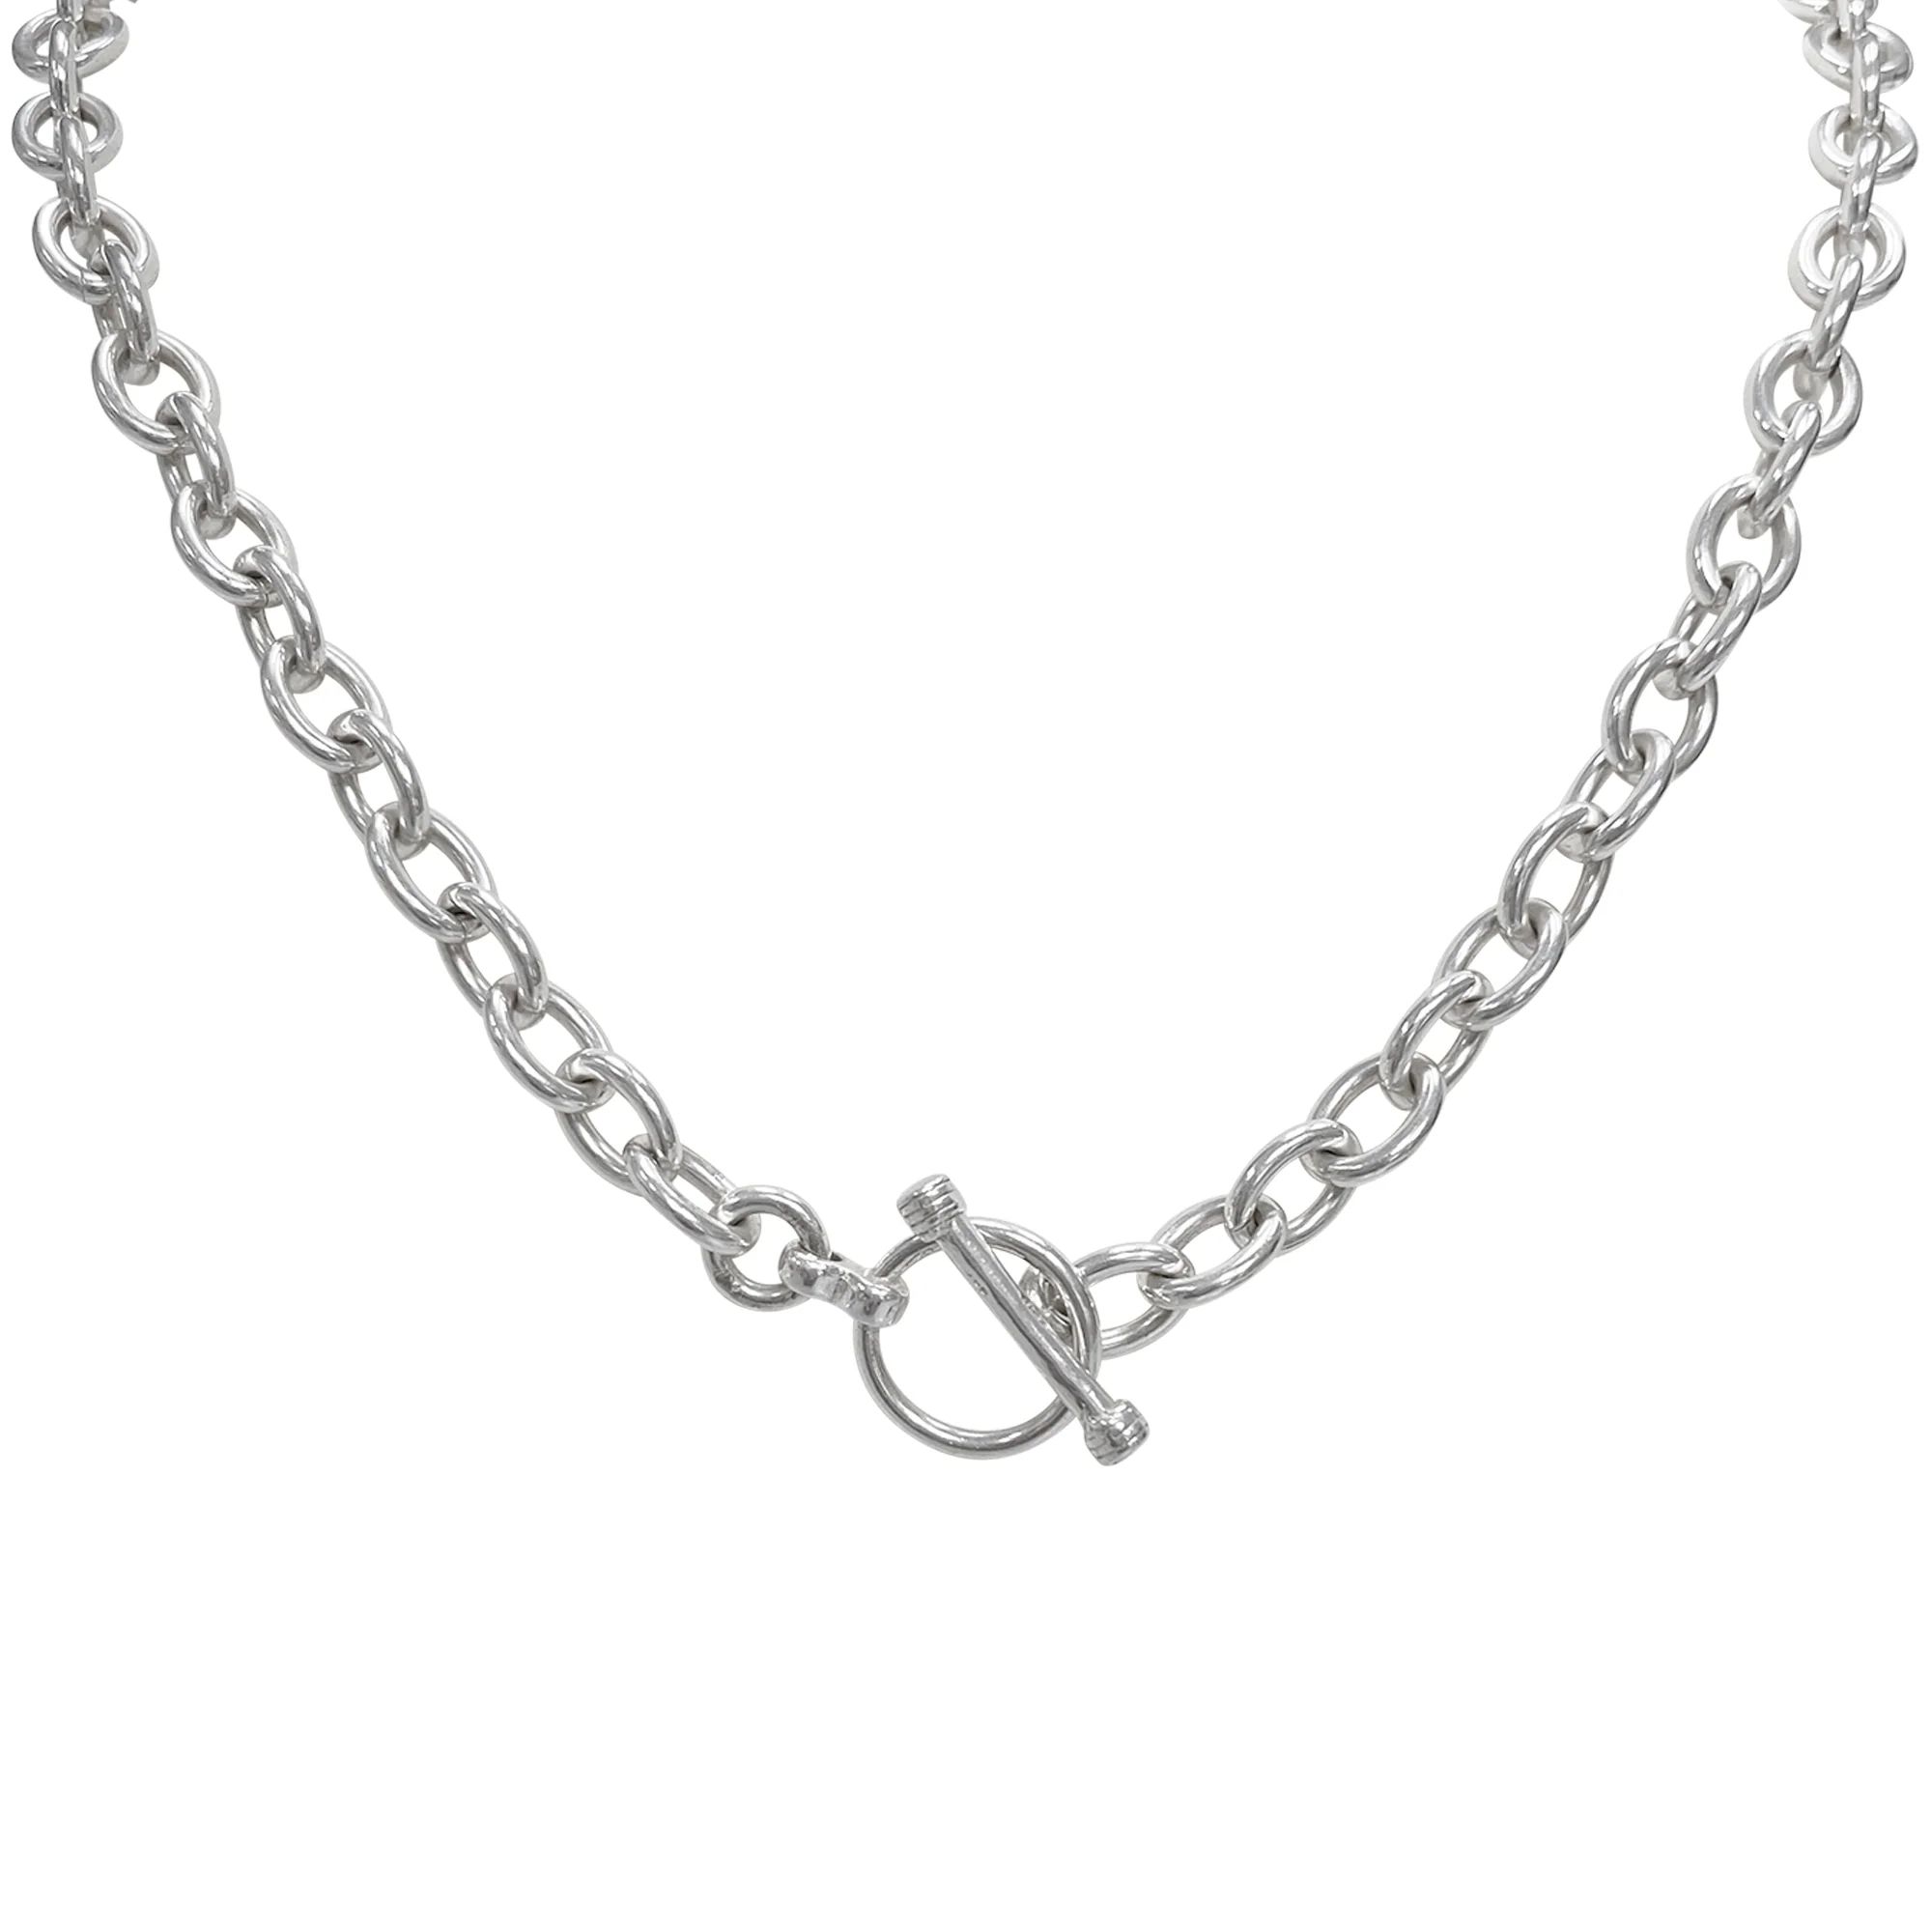 Toggle Me Up Sterling Silver Toggle Necklace Chain | La Soula Jules